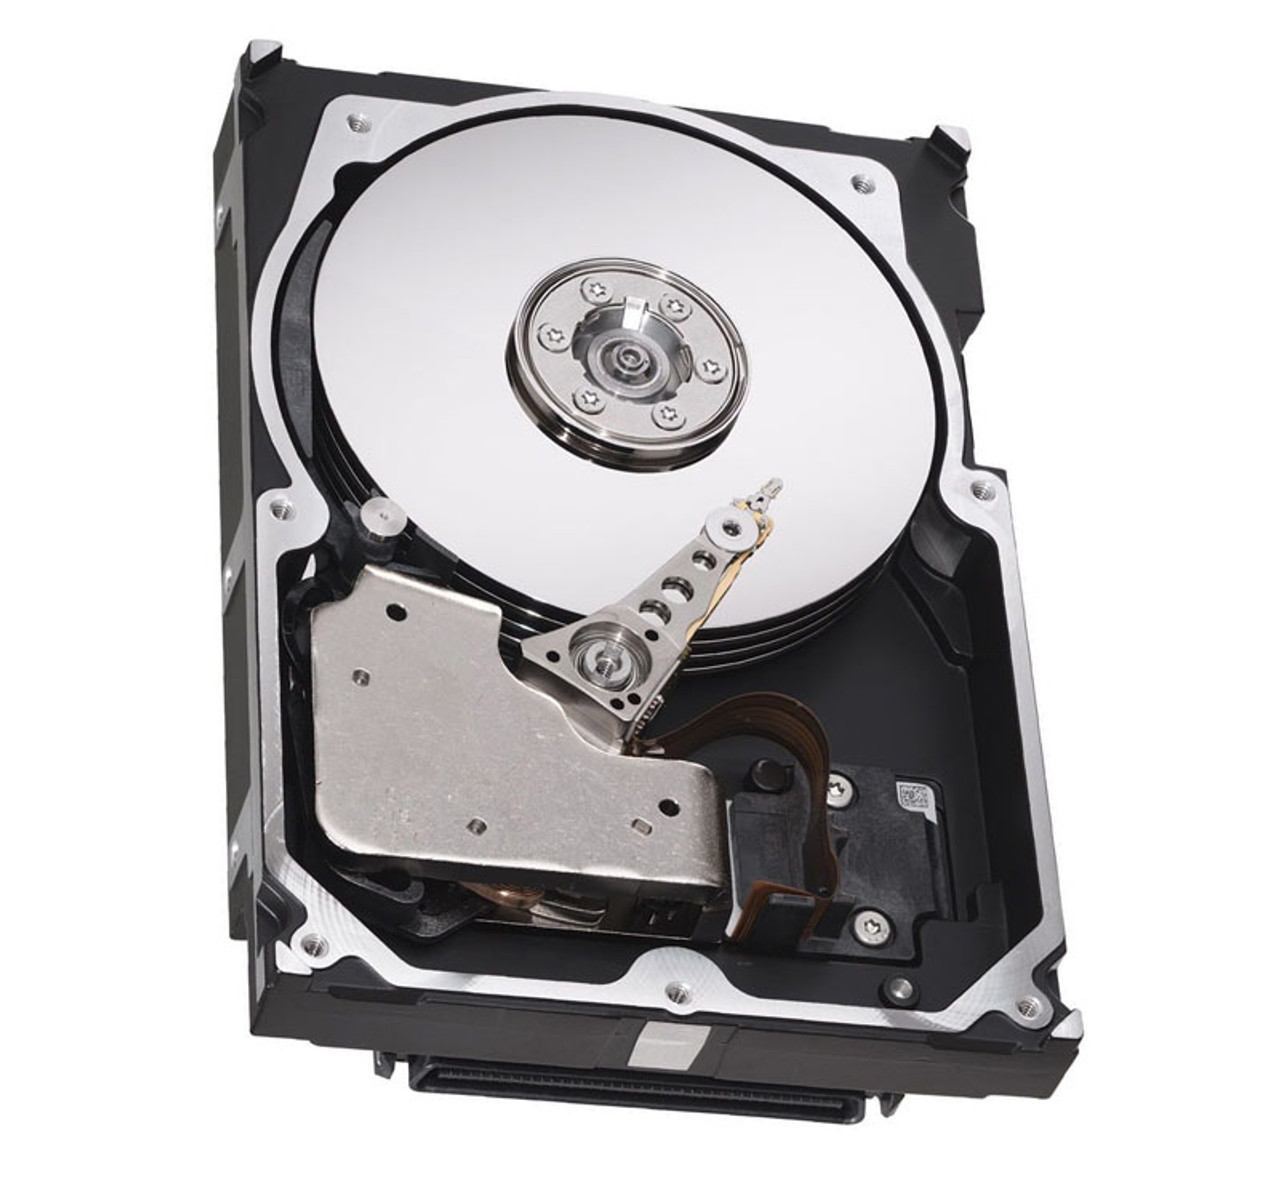 D7050ANT - HP 18.2GB 10000RPM Ultra-160 SCSI Hot-Pluggable LVD 80-Pin 3.5-inch Hard Drive